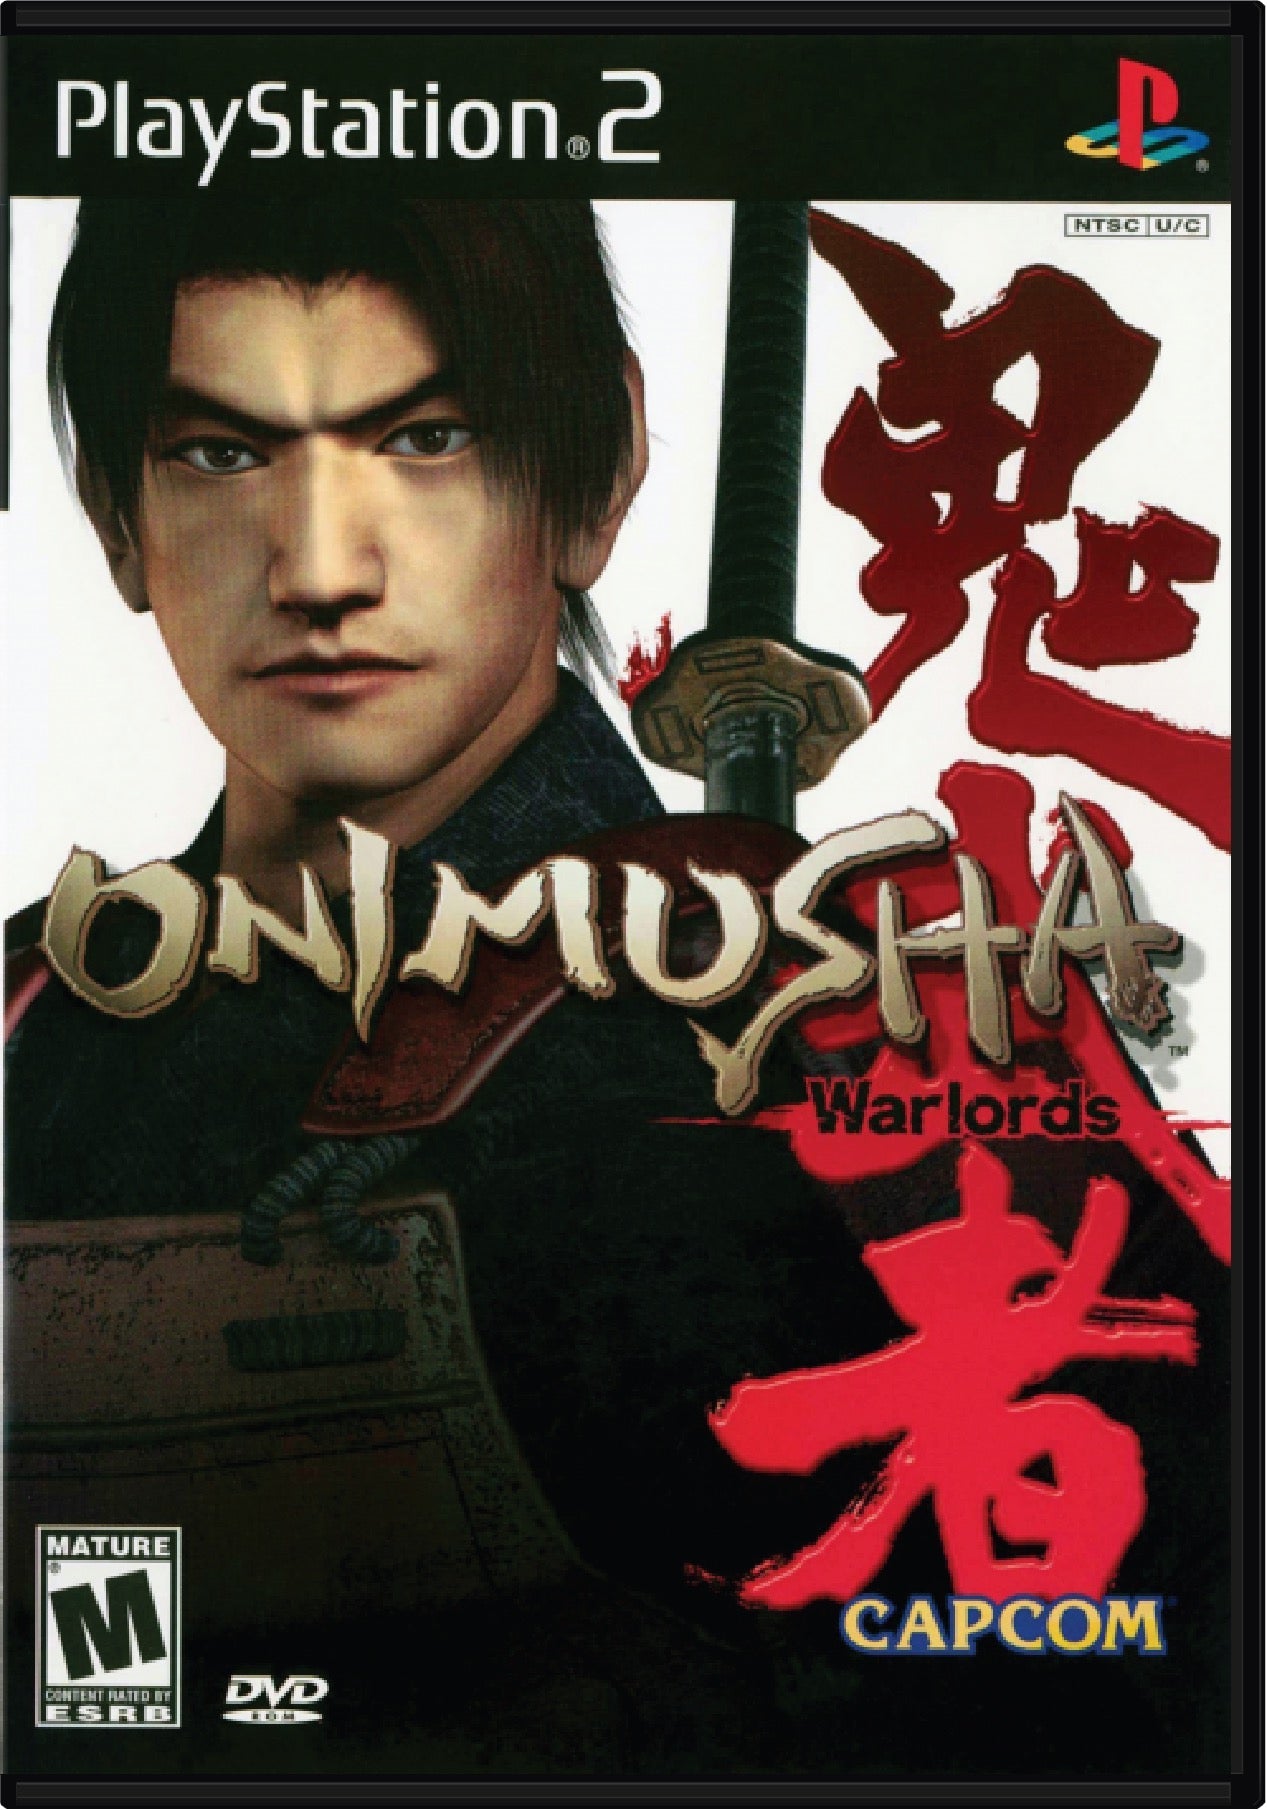 Onimusha Warlords Cover Art and Product Photo